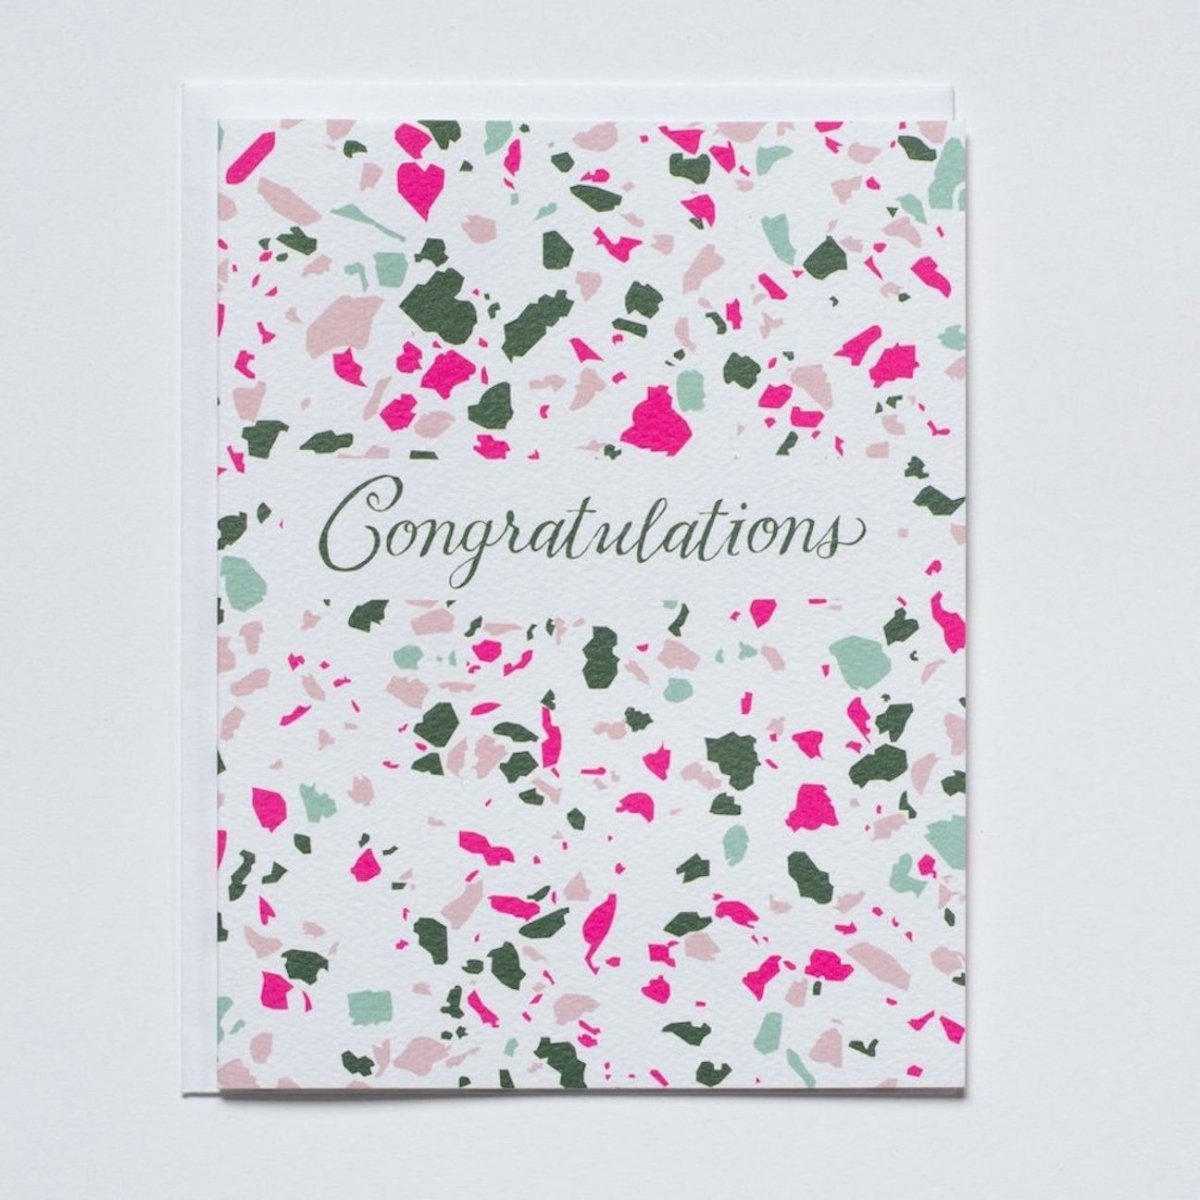 White card with pink and green terrazzo pattern that reads: "CONGRATULATIONS" in green script. Made with recycled paper by Banquet Atelier in Vancouver, British Columbia, Canada.